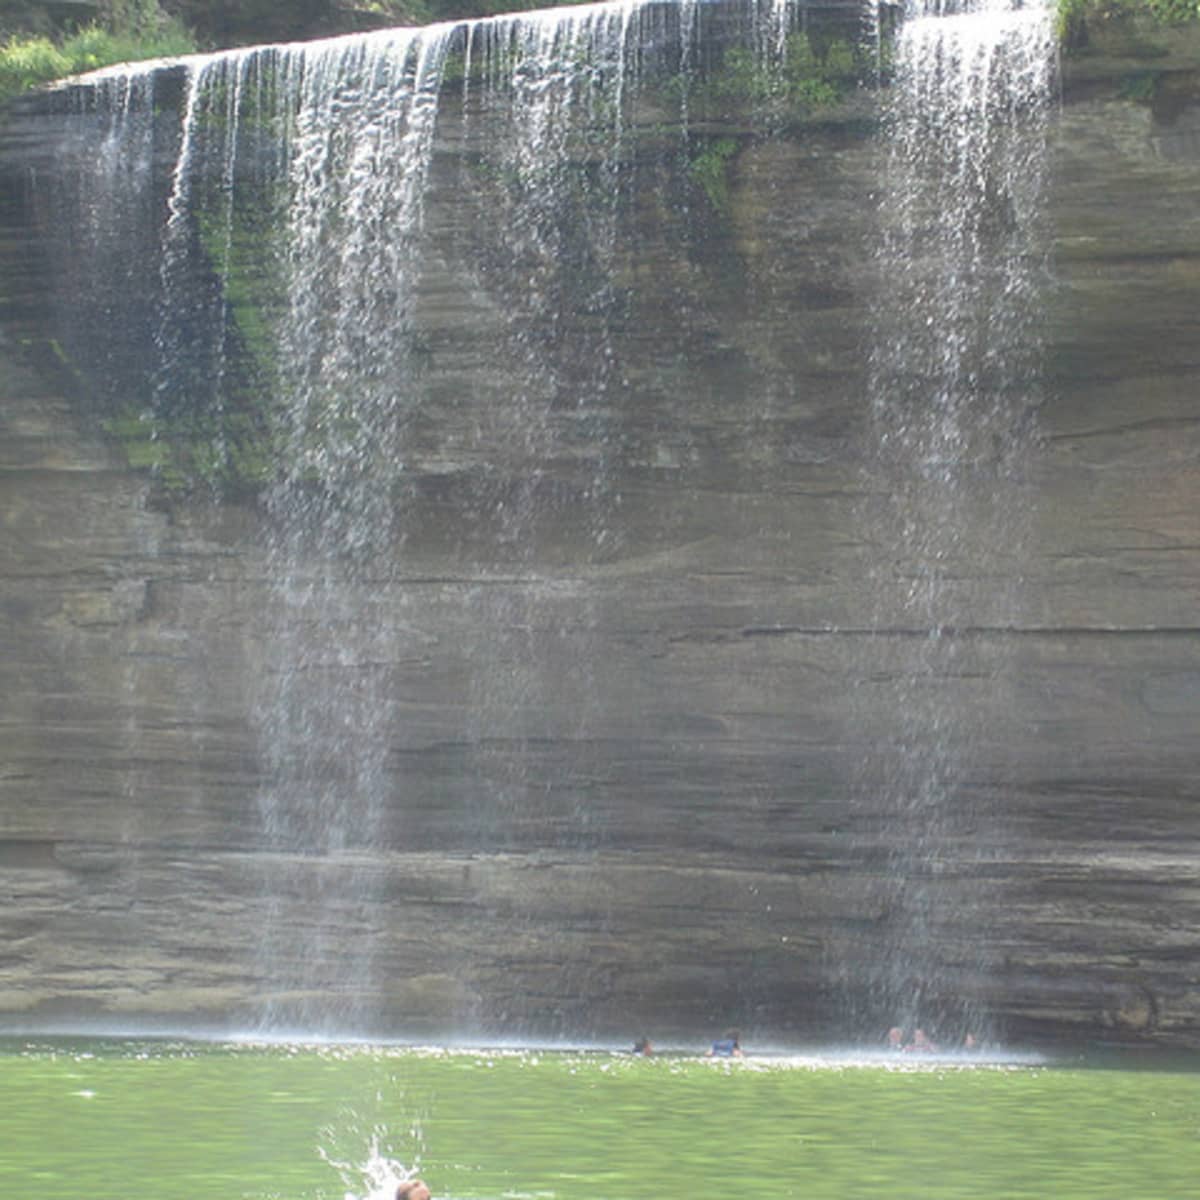 courtney davenport recommends 76 Falls Lake Cumberland Location